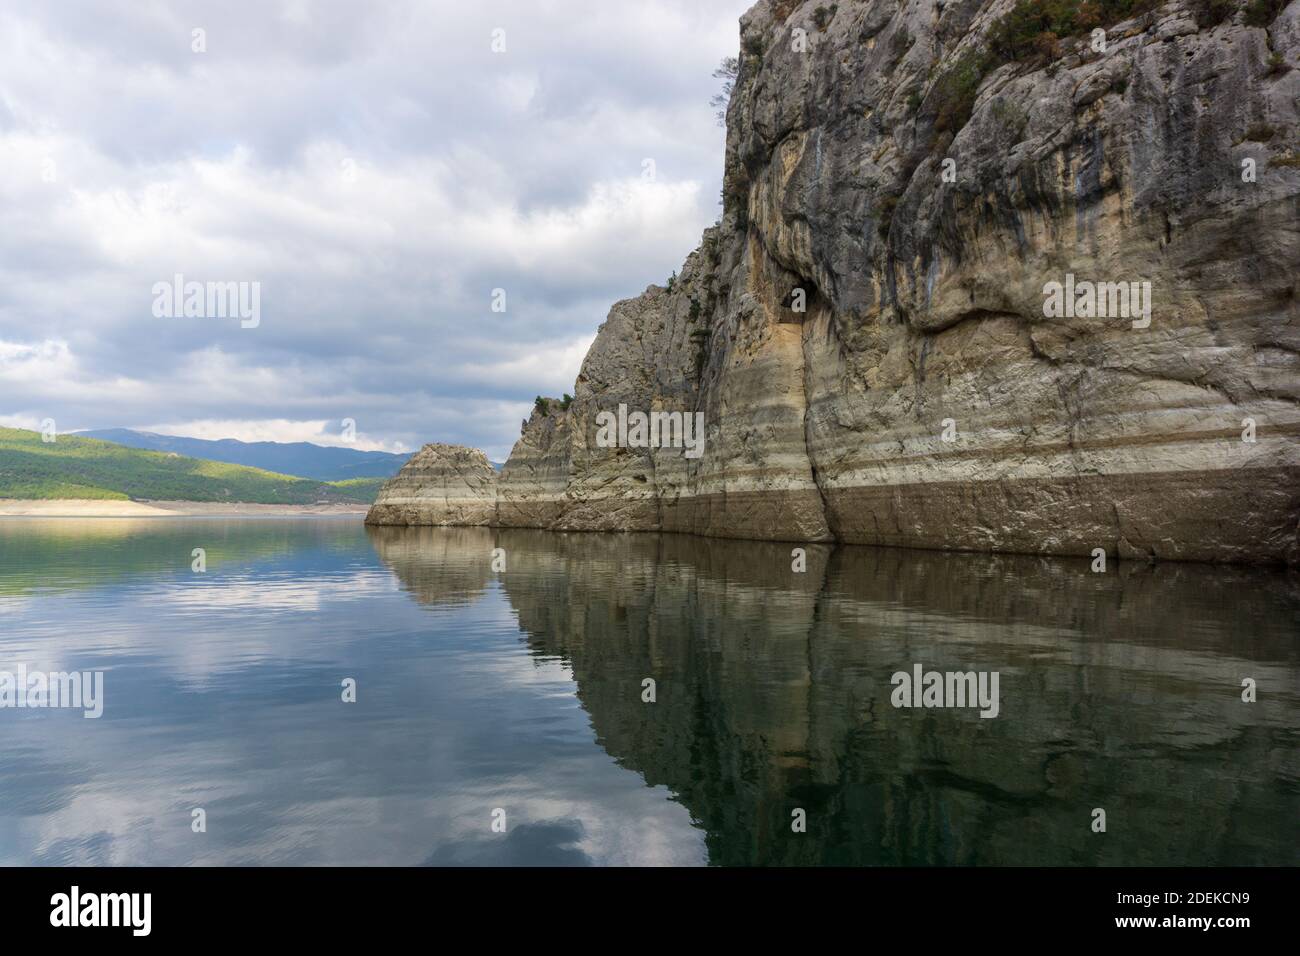 Reflection of rocks in water on a cloudy day Stock Photo